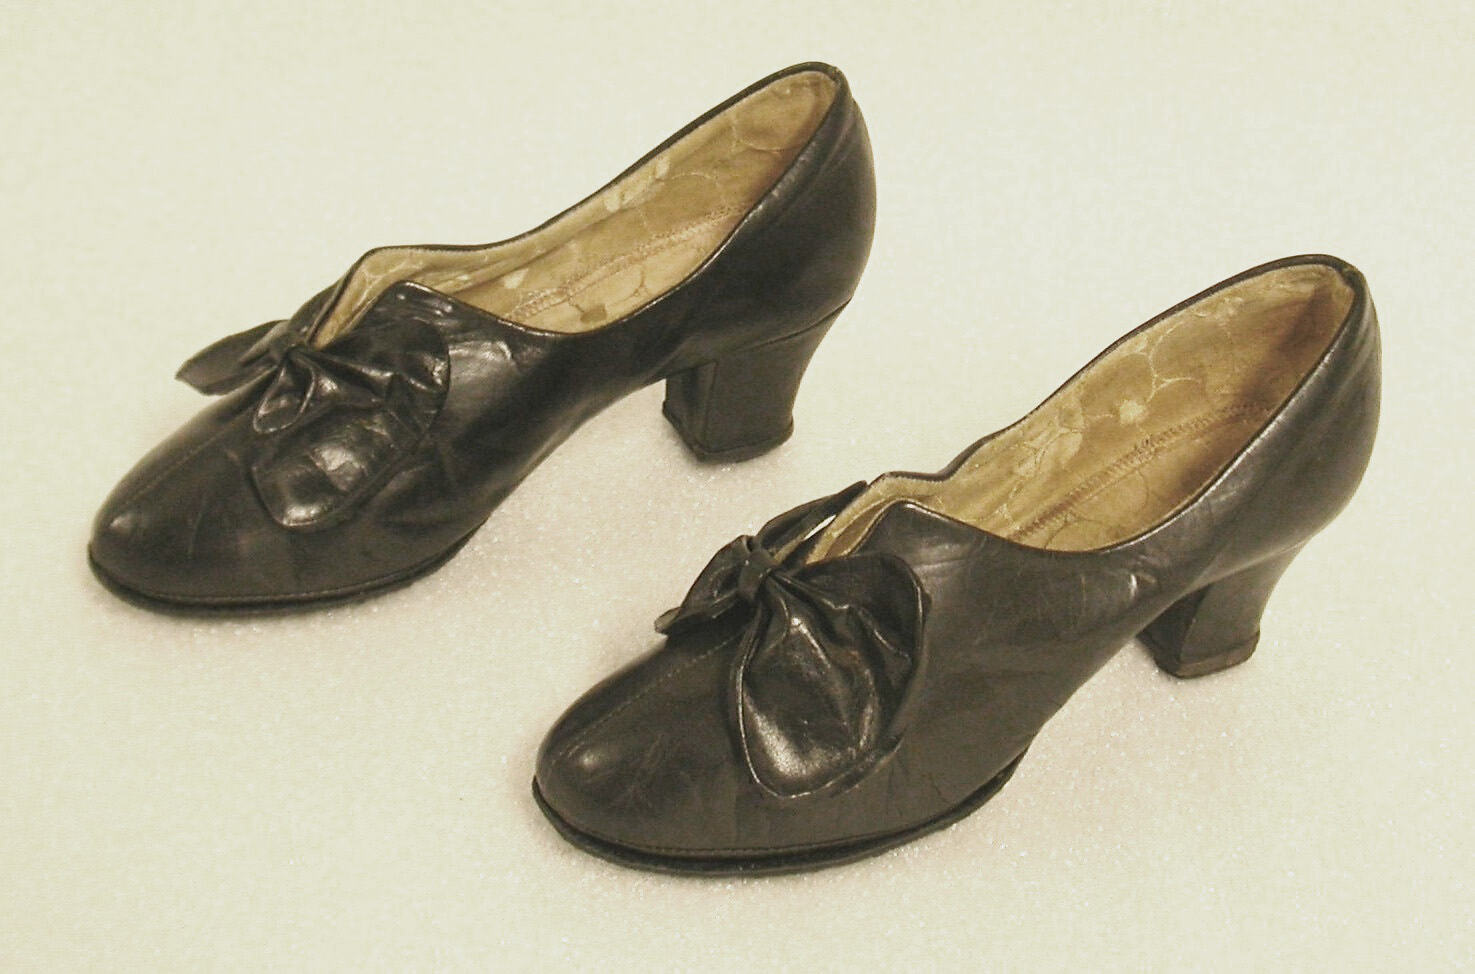 Shoes - Court, Black Leather, circa 1920-1949